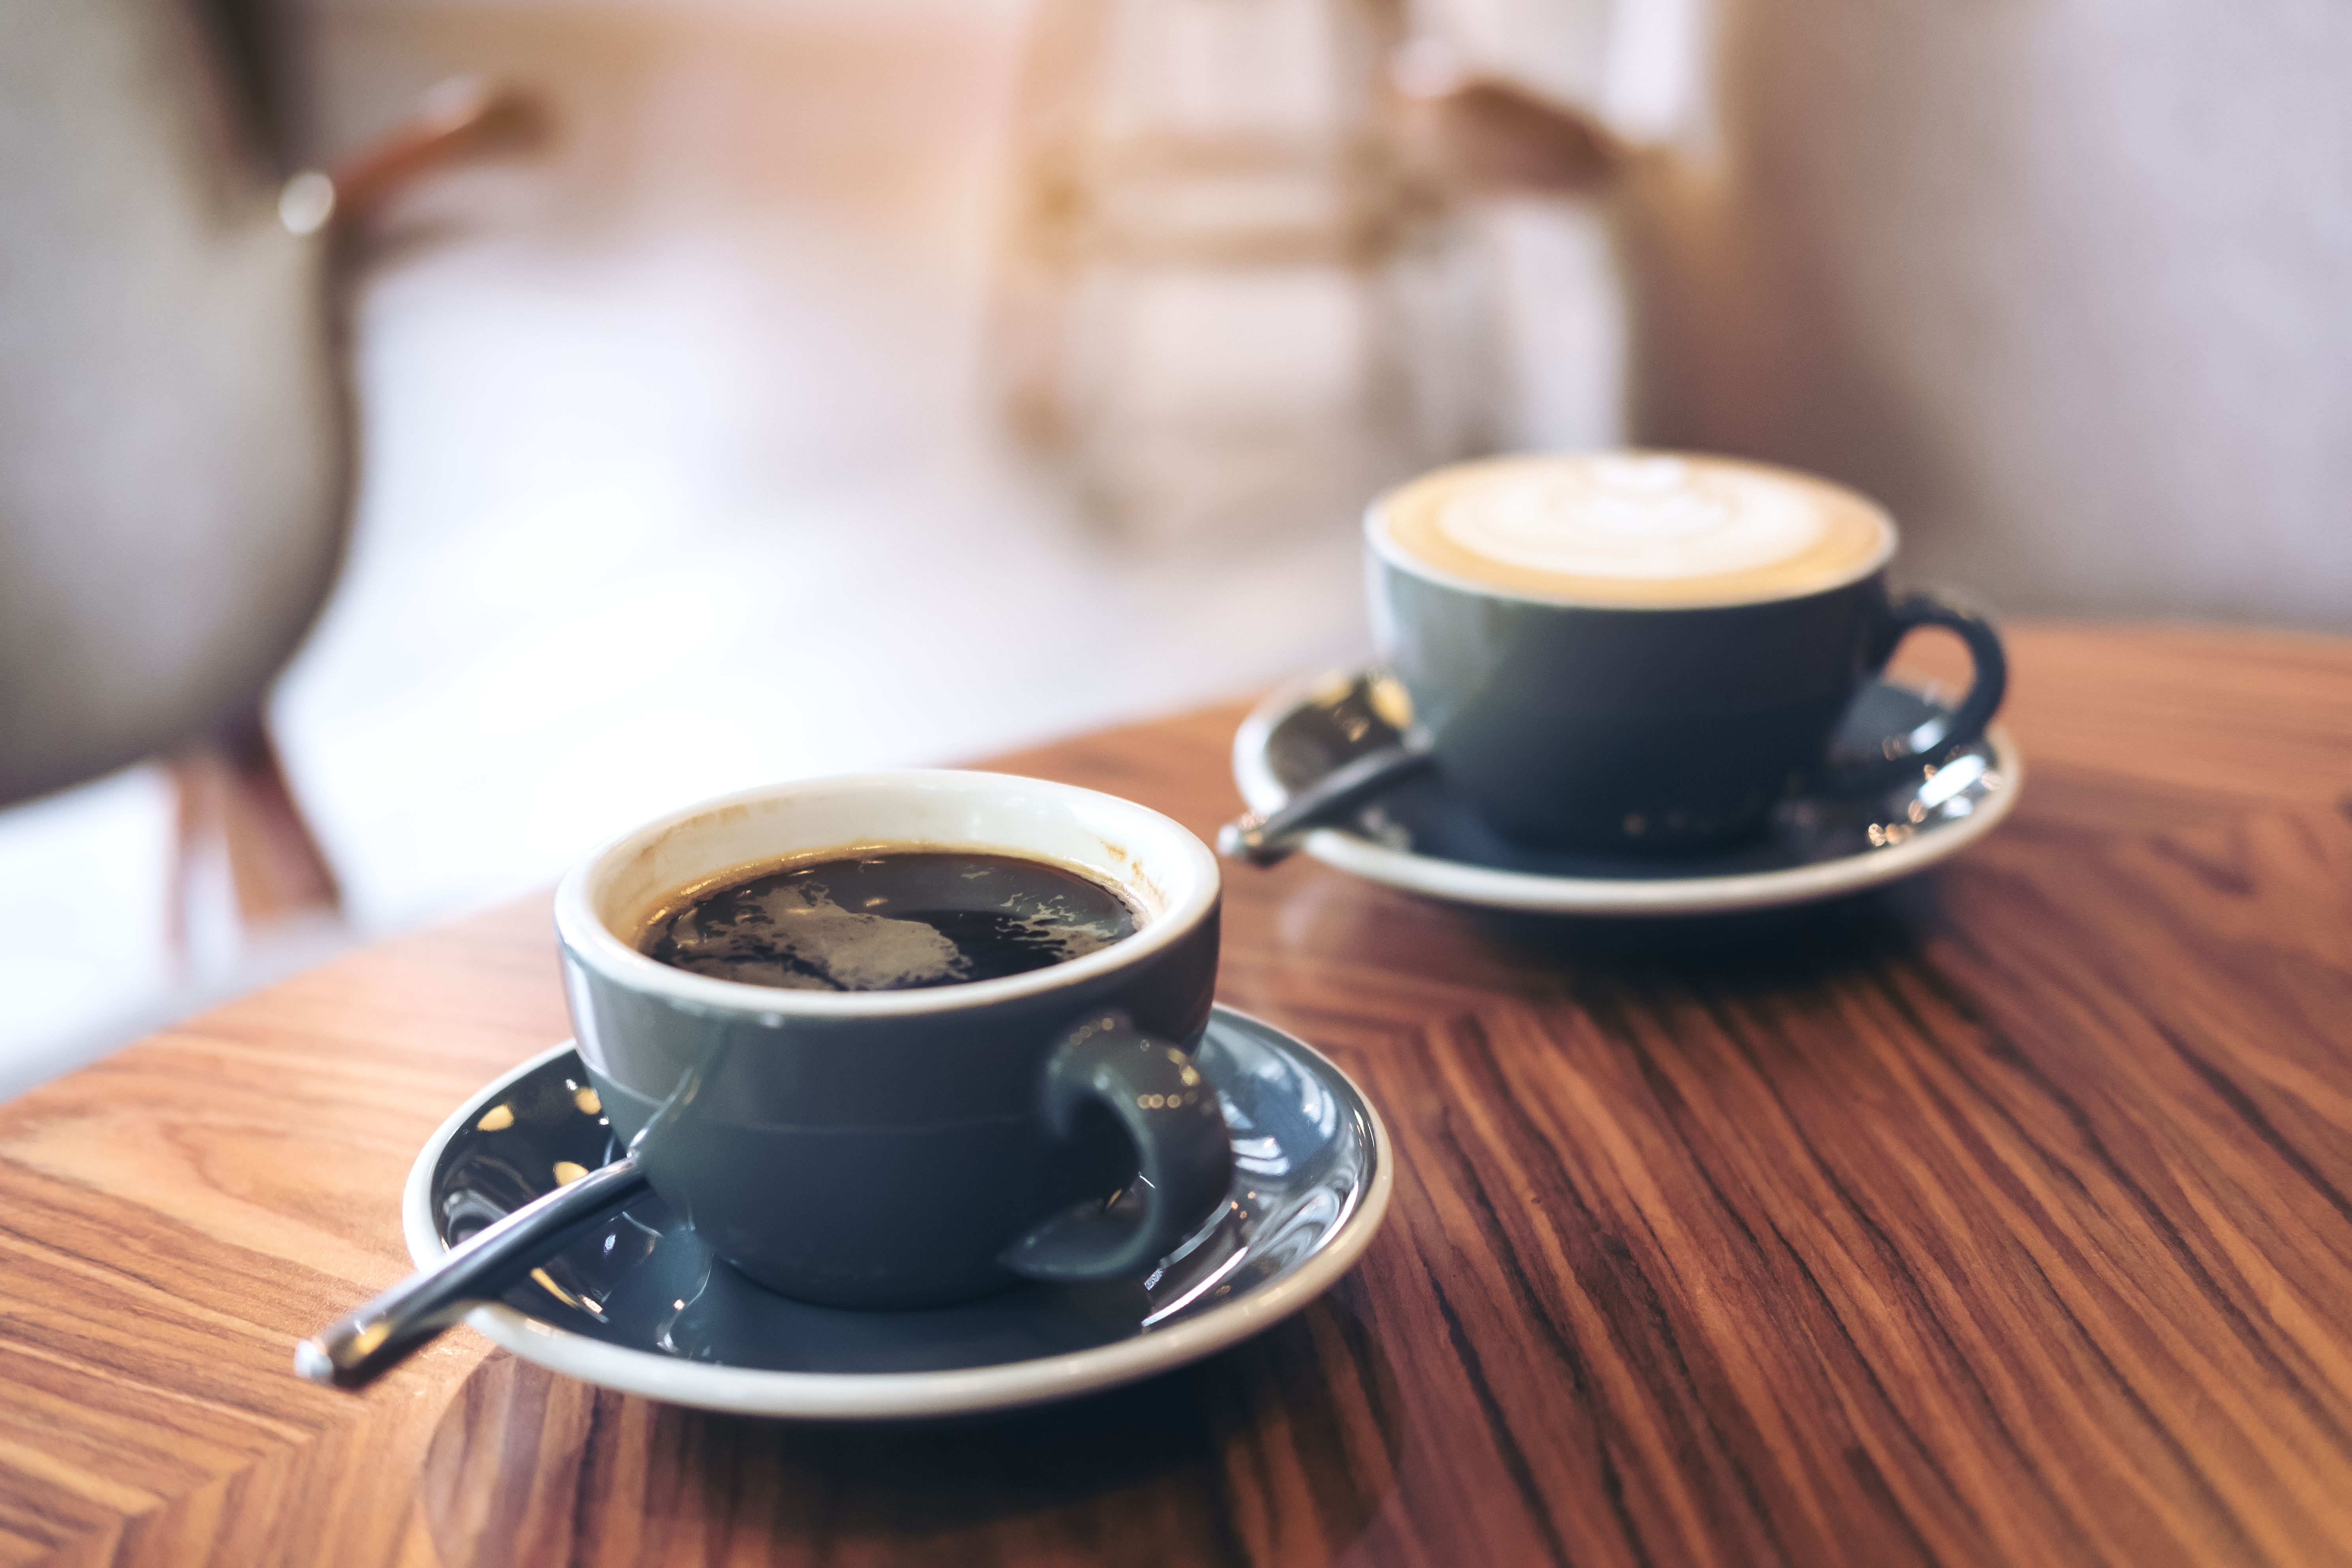 Closeup image of two blue cups of hot latte coffee and Americano coffee on vintage wooden table in cafe | Source: Shutterstock